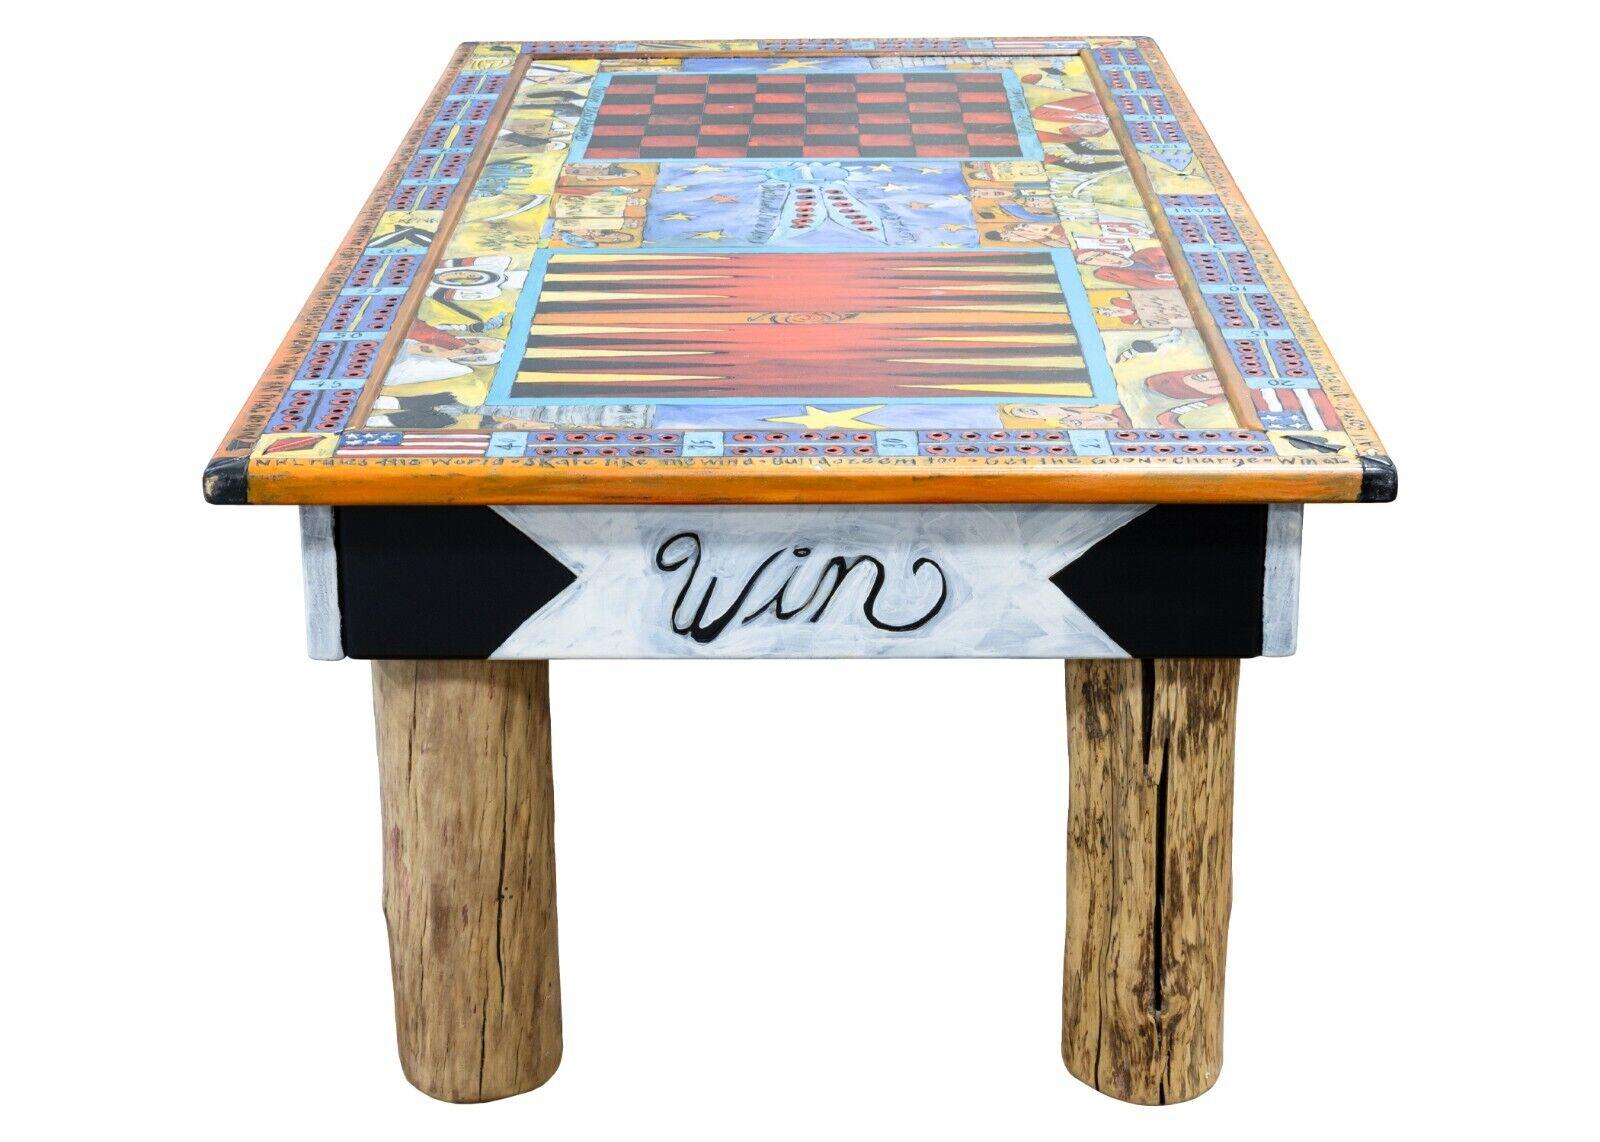 A custom, hand painted, Red Wings & Blackhawks hockey game table by 